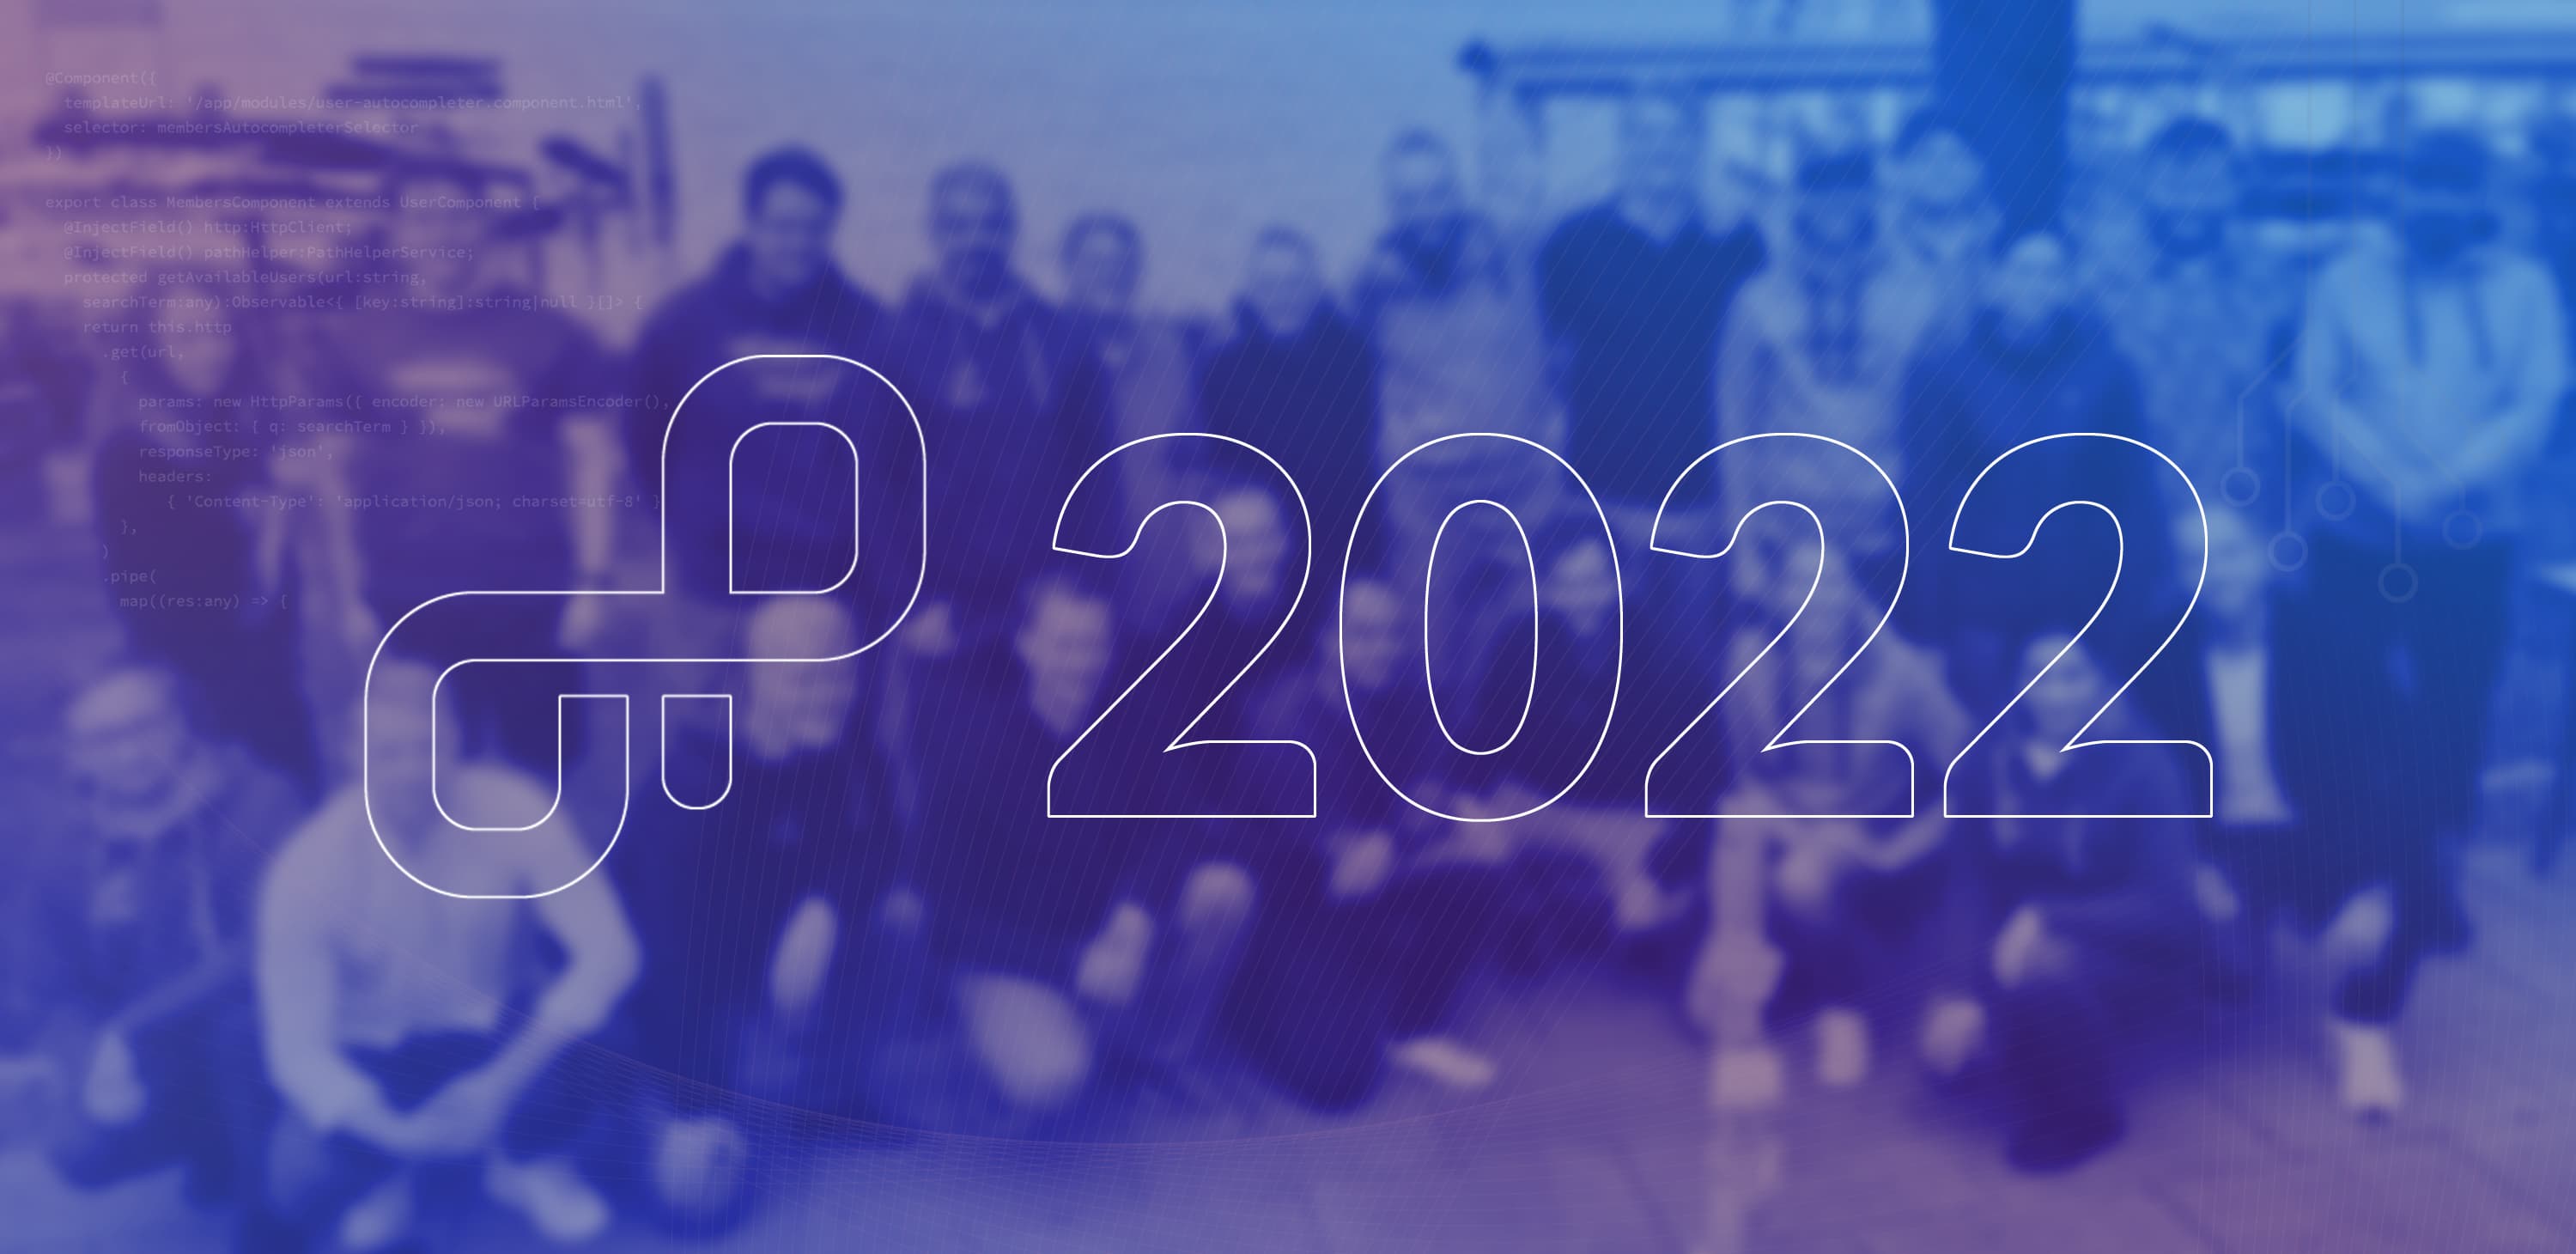 OpenProject team with year 2022 in the centre of the image